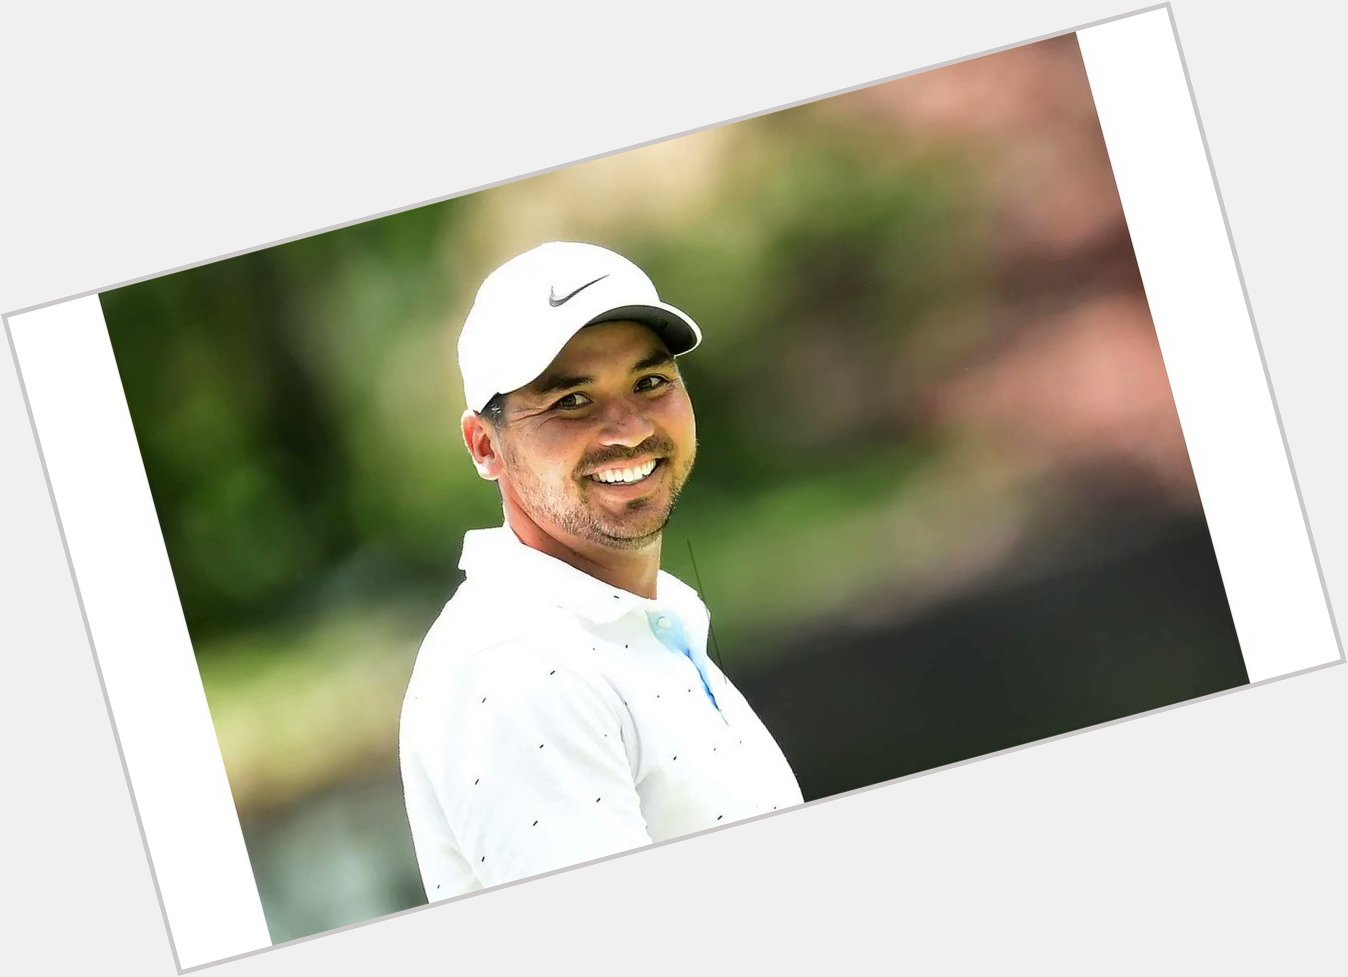 Happy birthday Jason Day ( who finished Round 1 at T22 at -2. 